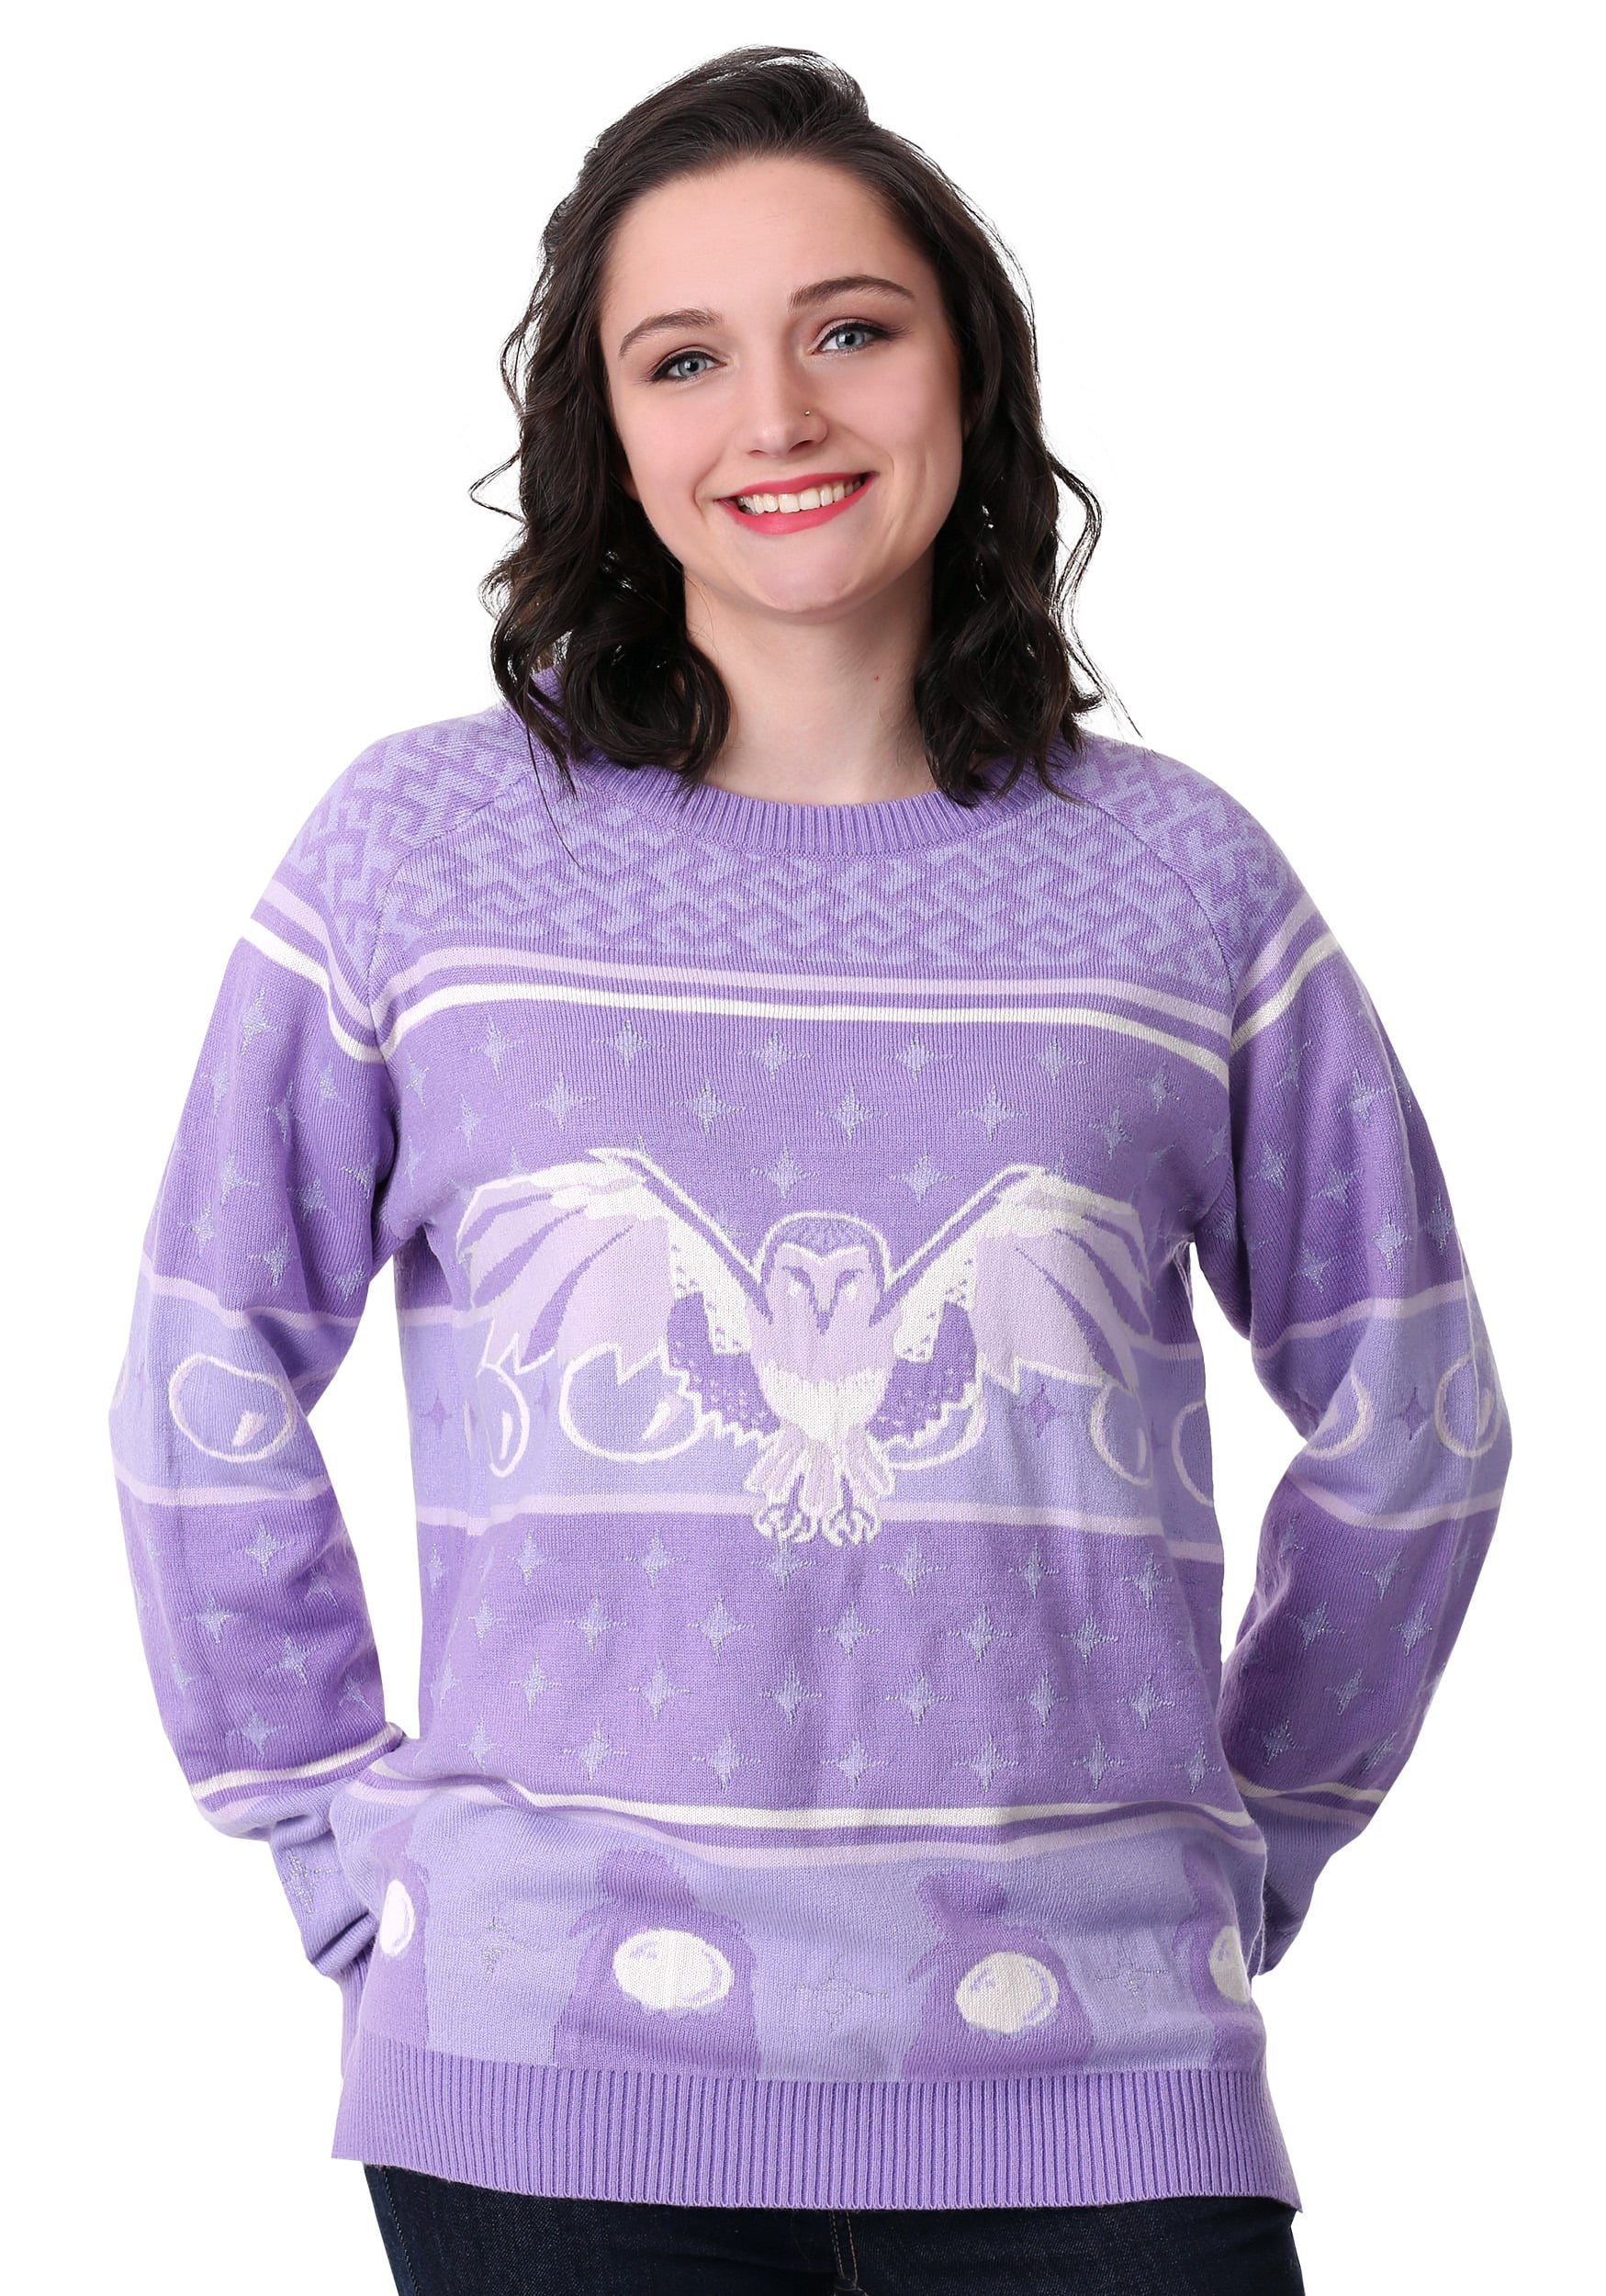 JINF Pullover Tops-Women's O Neck Elk Snowflake-Sweater Christmas Xmas Pullover Sweater Knit Tops Blouse 